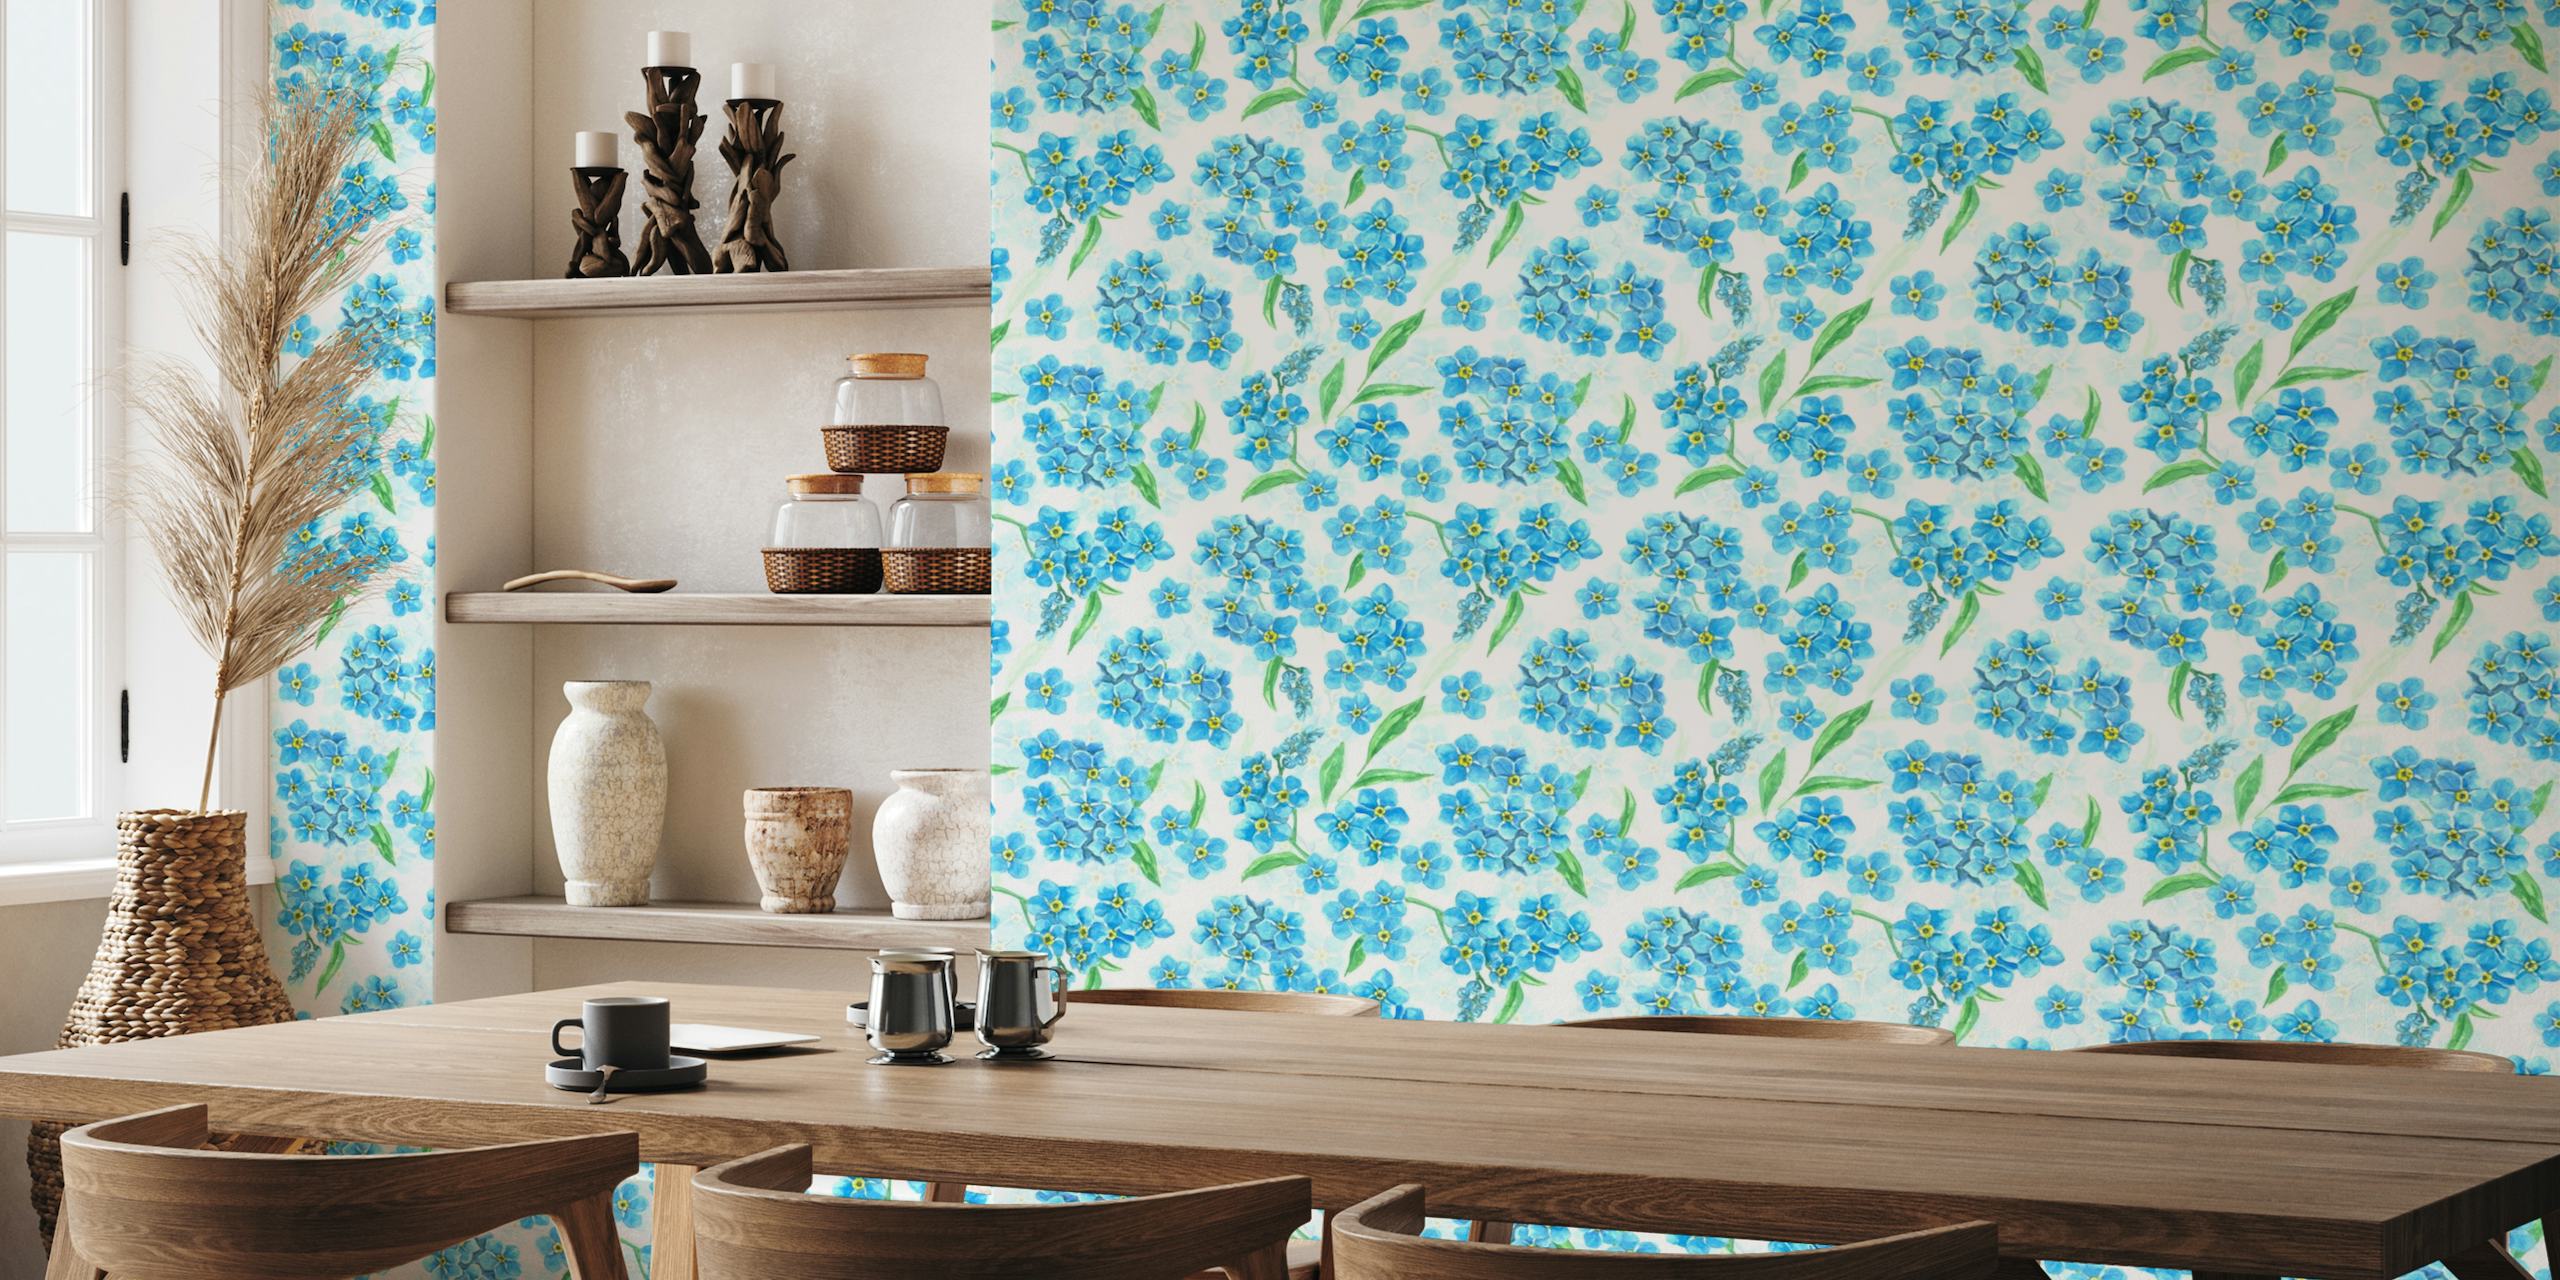 A wall mural with a pattern of blue forget-me-not flowers and green leaves on a white background.